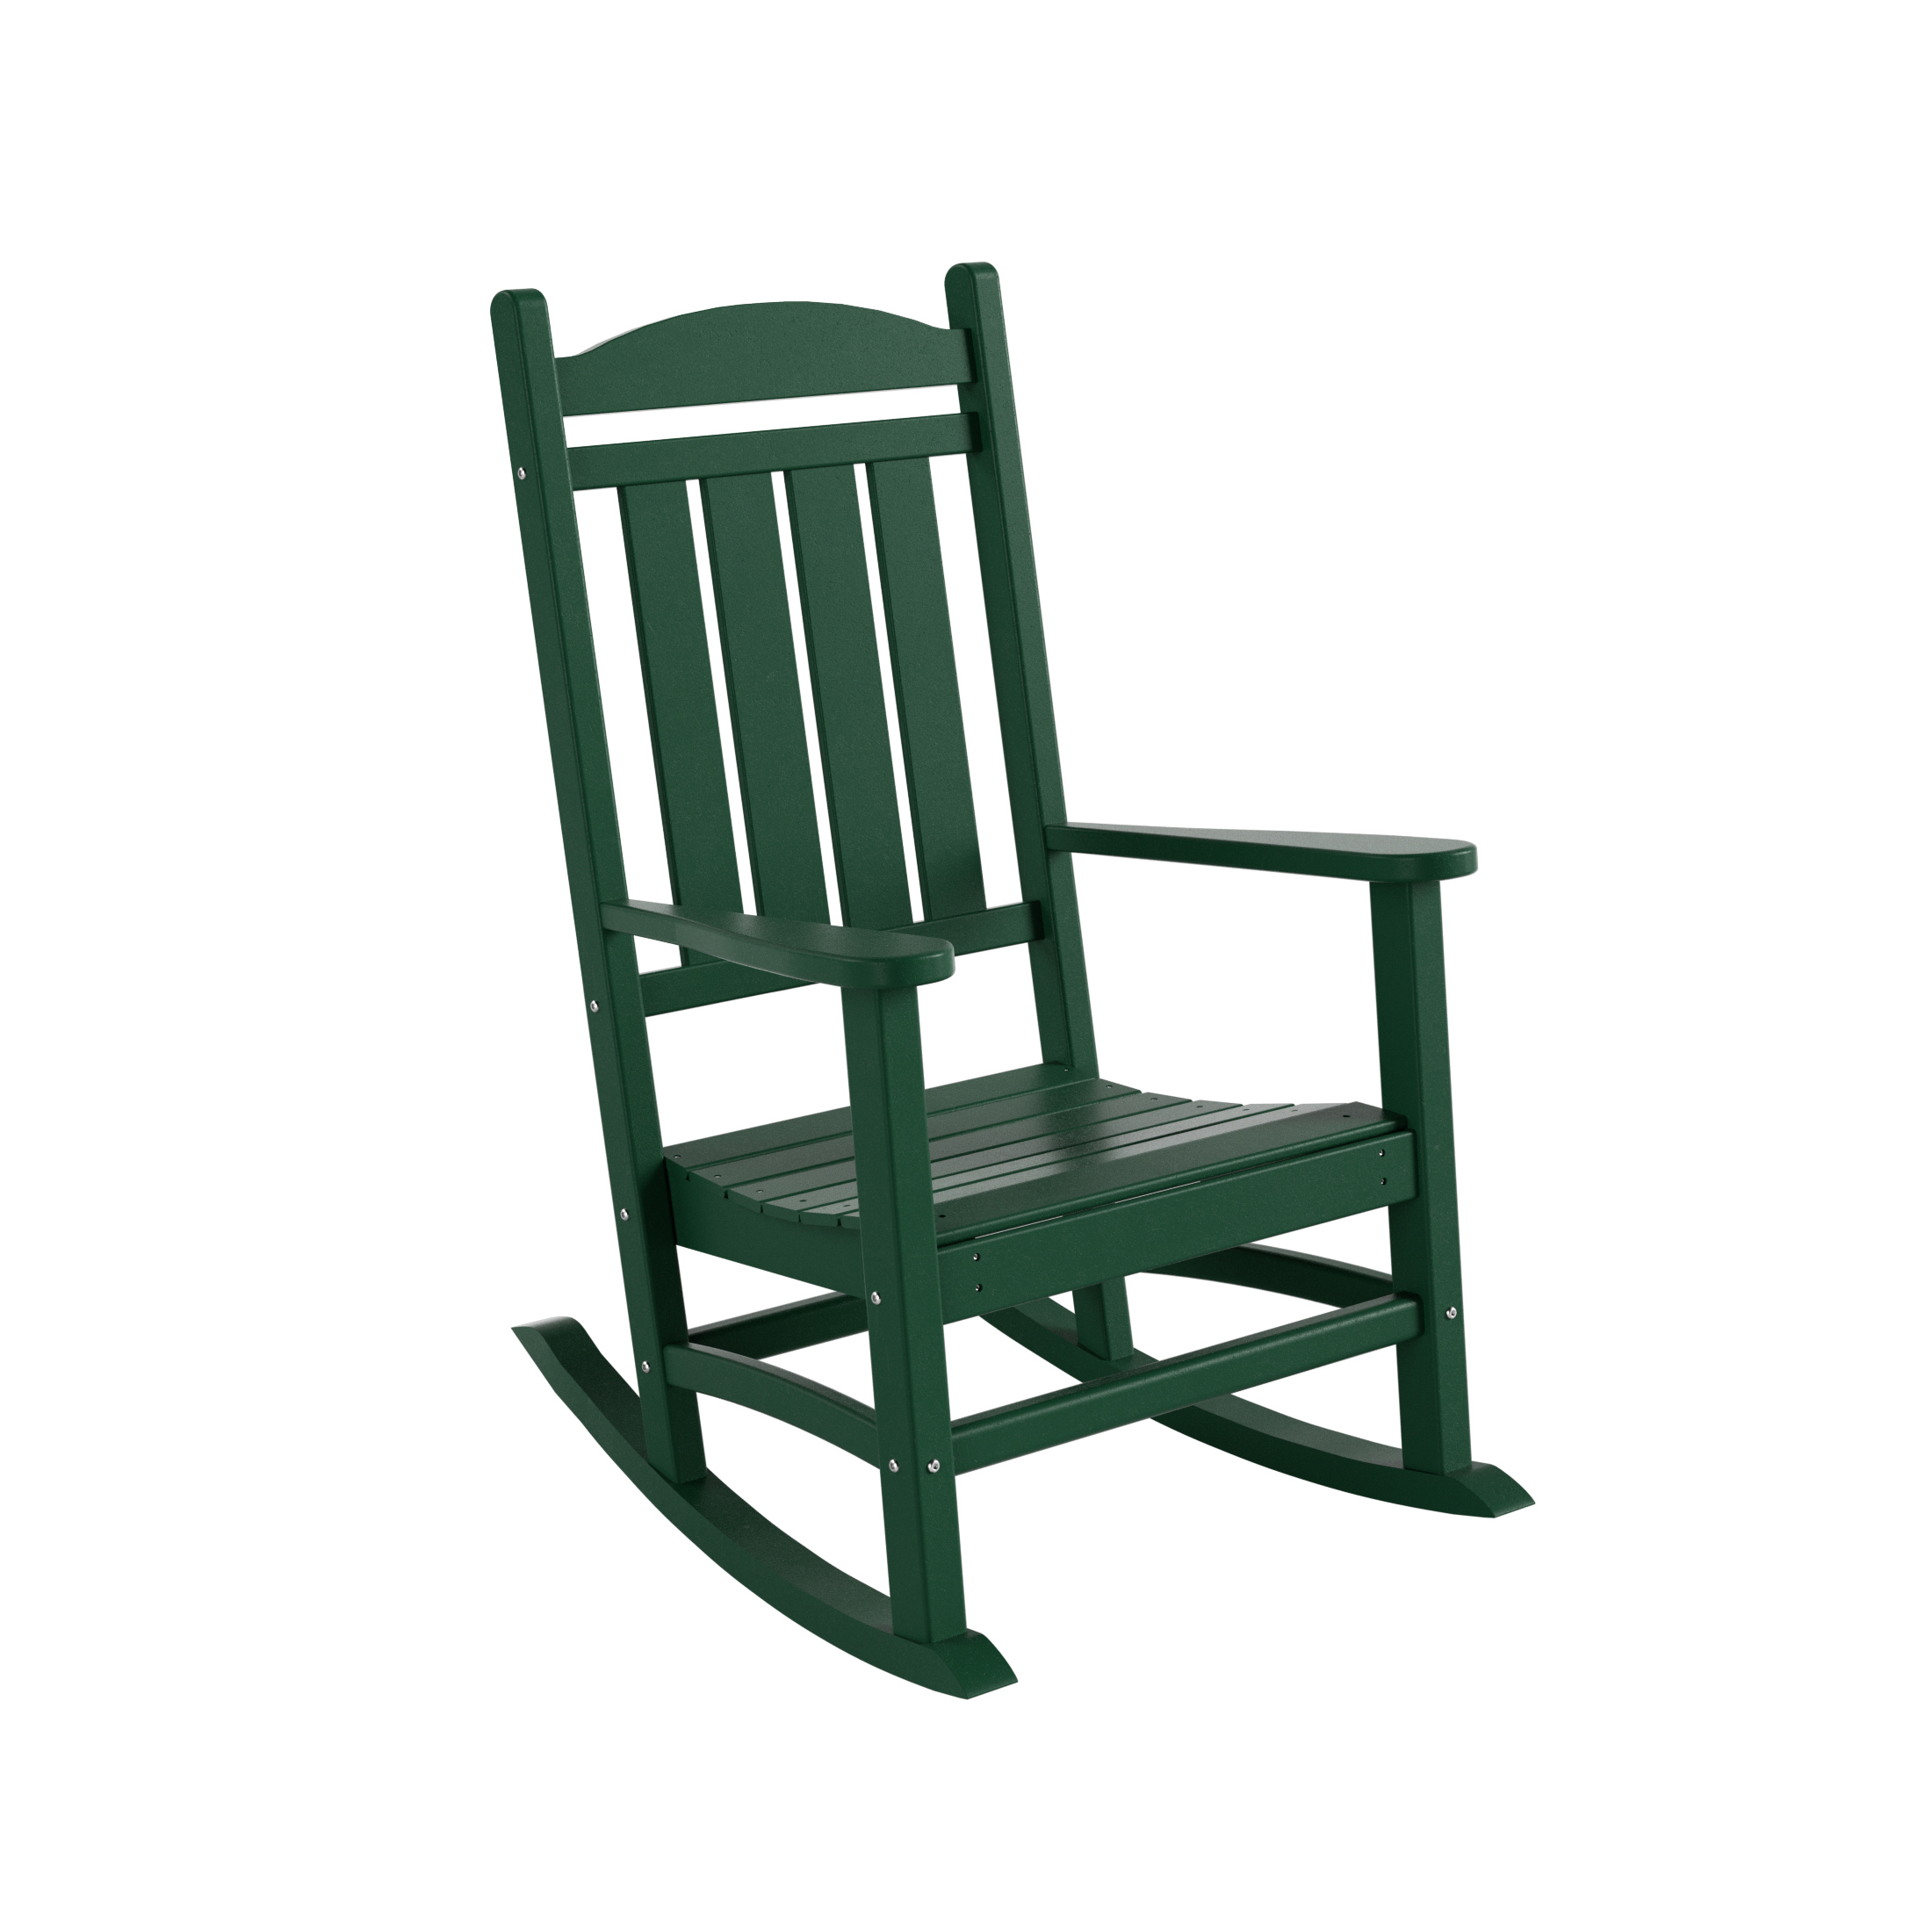 Costaelm Paradise Classic Plastic Porch Rocking Chair, Dark Green - image 1 of 9